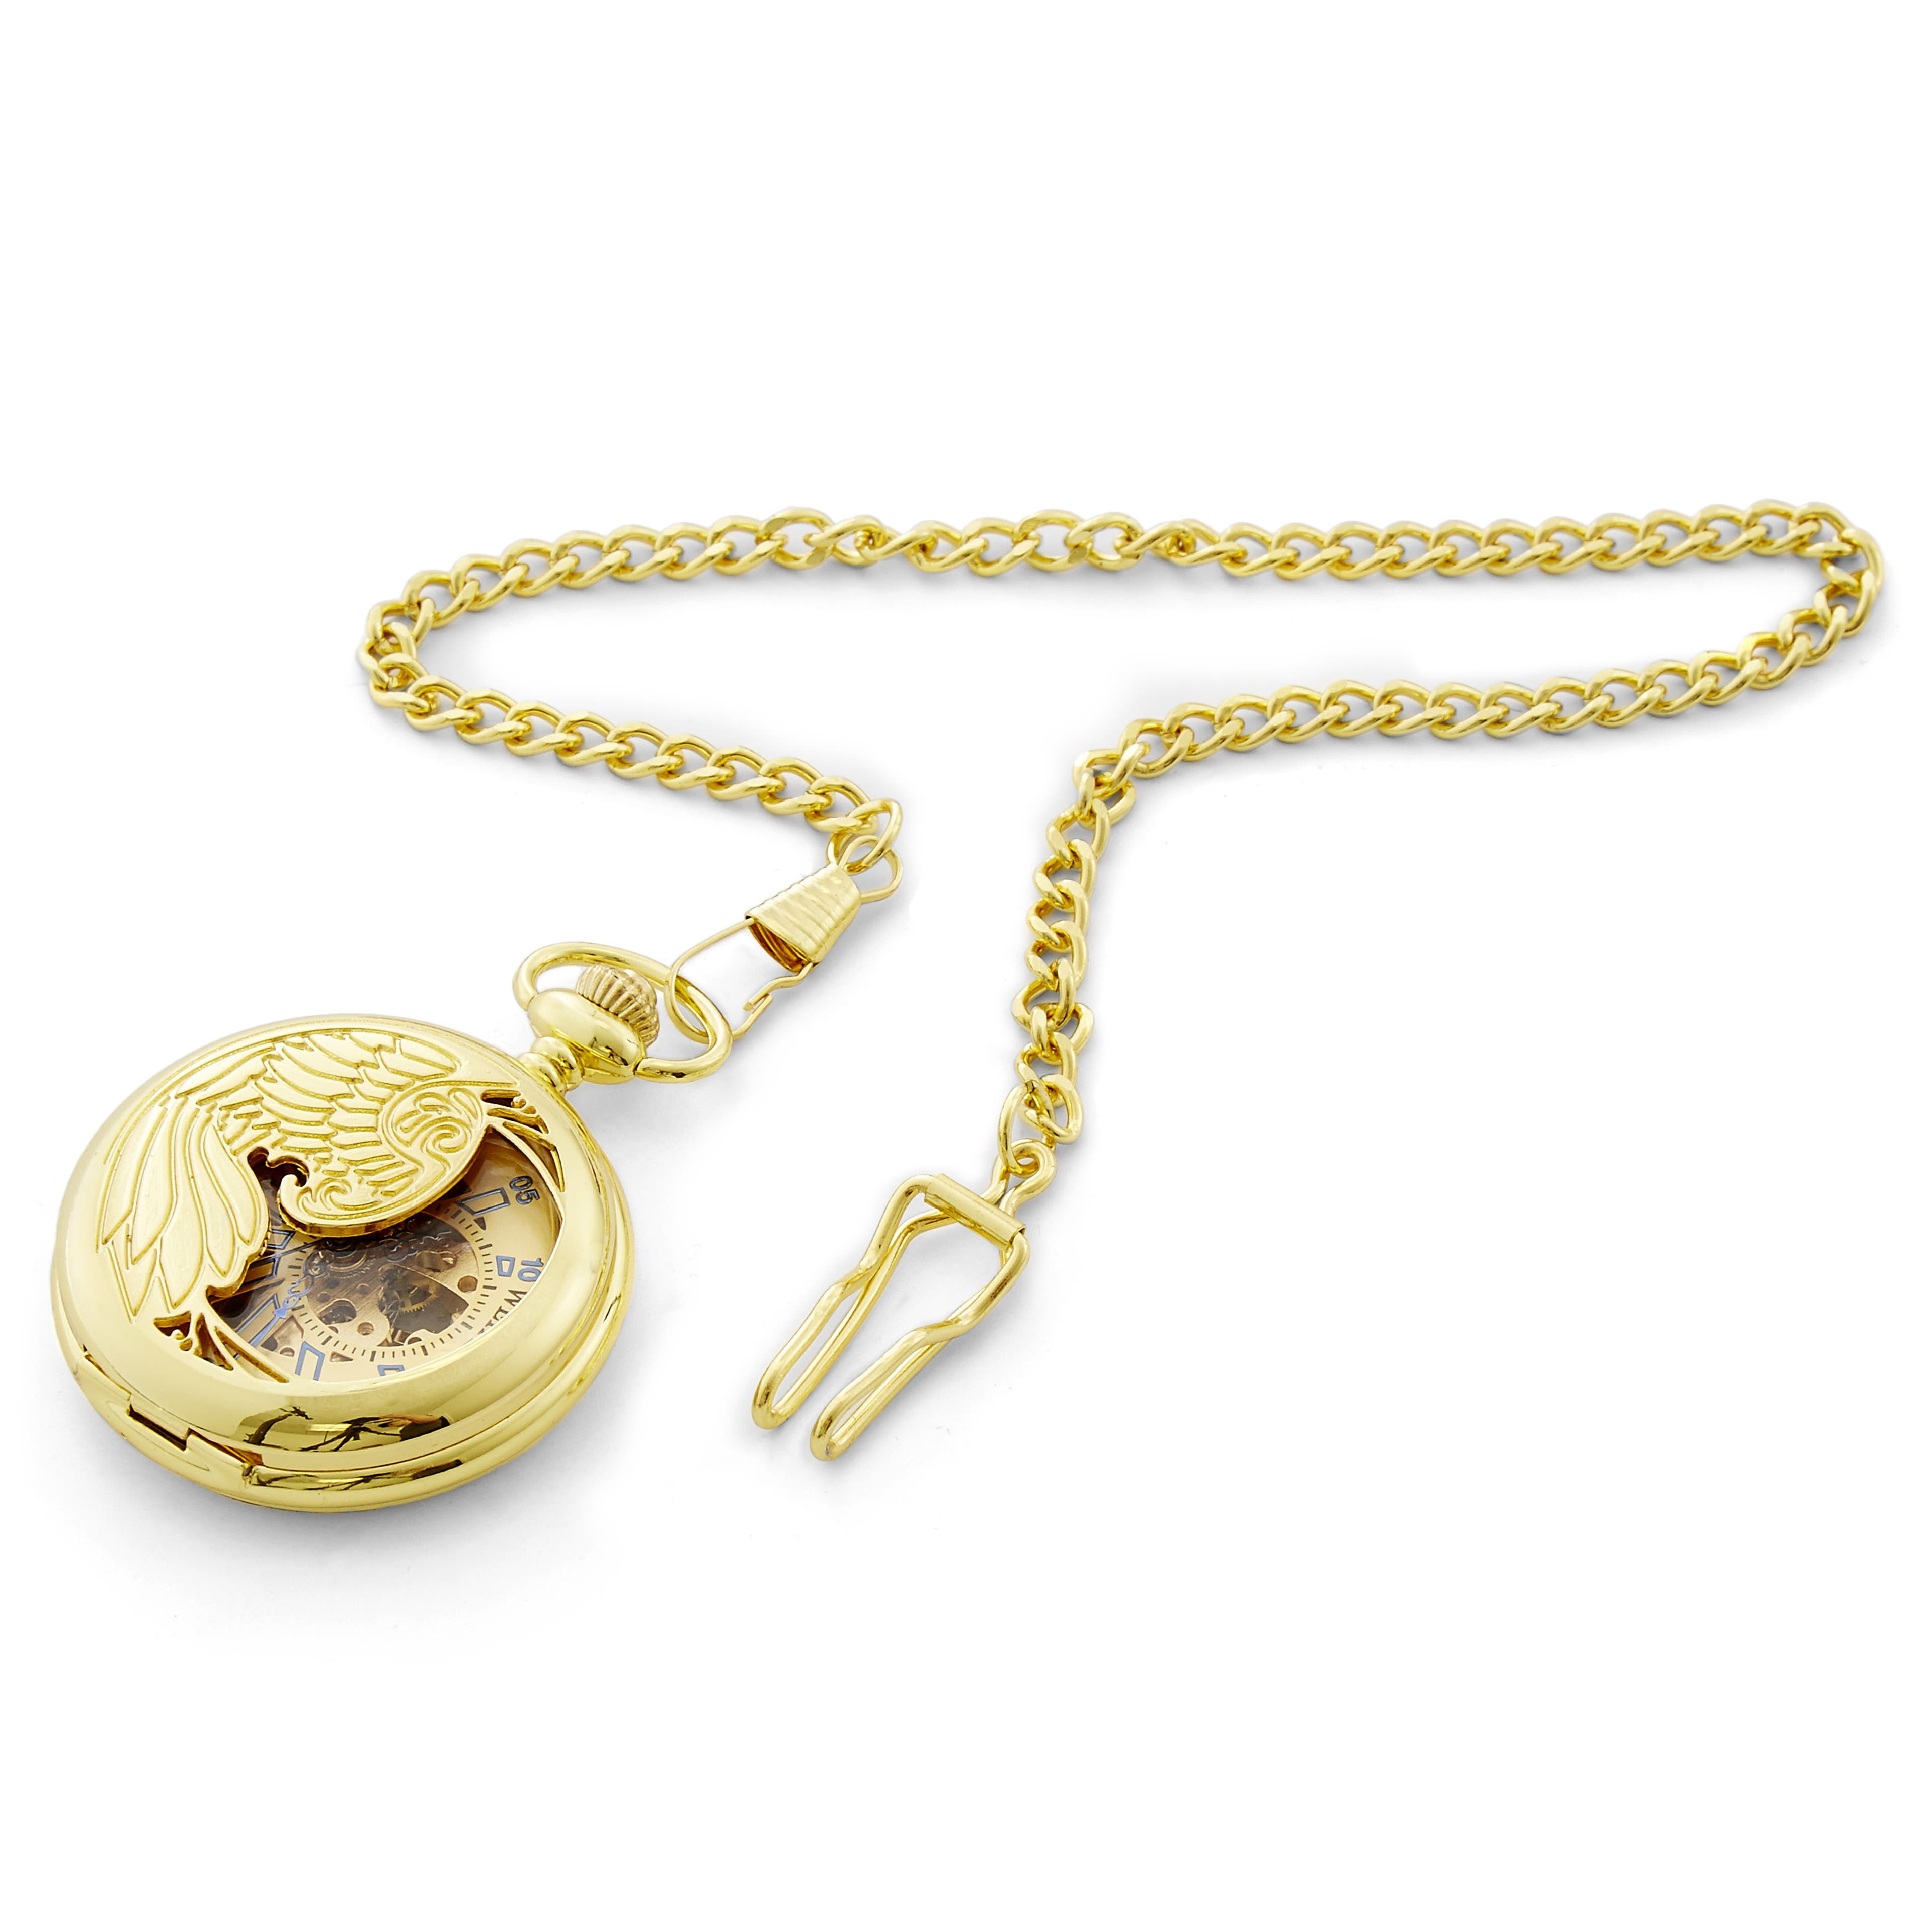 Gold-Tone Phoenix Skeleton Pocket Watch With Gold-Tone Cable Chain